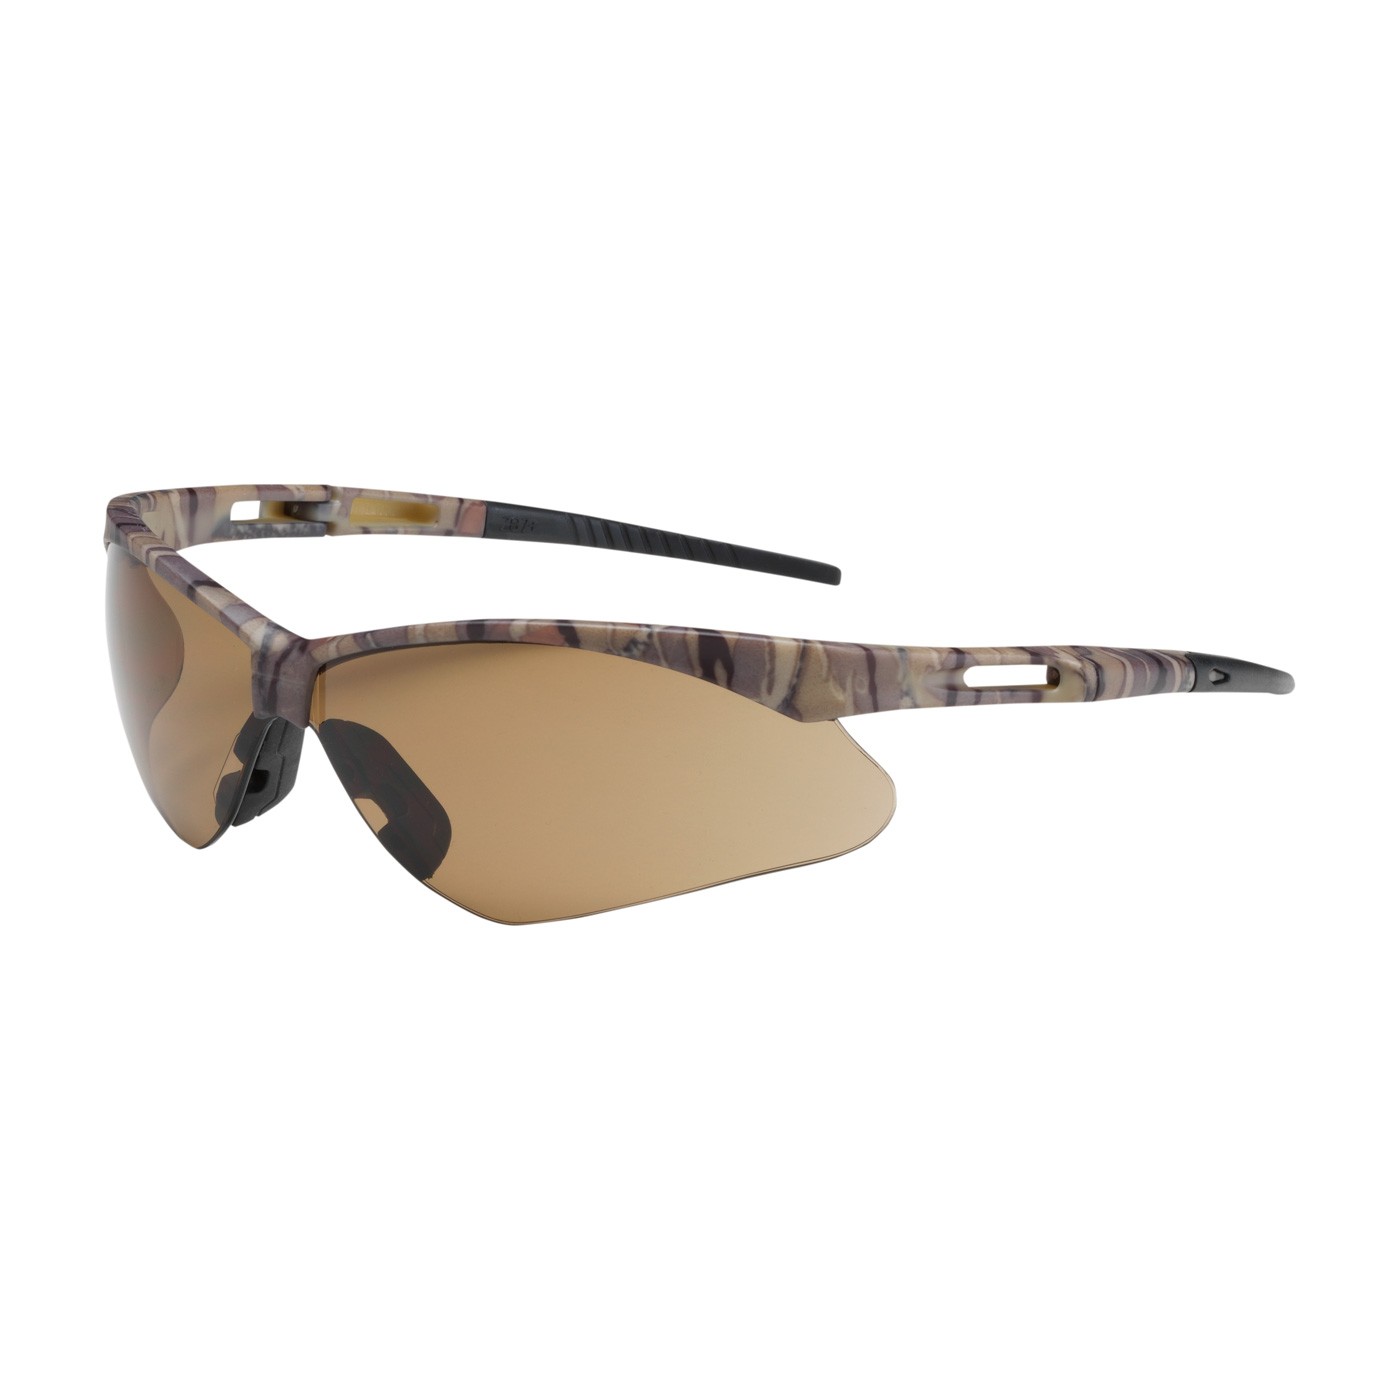 Anser™ Semi-Rimless Safety Glasses with Camouflage Frame, Brown Lens and Anti-Scratch Coating  (#250-AN-10121)